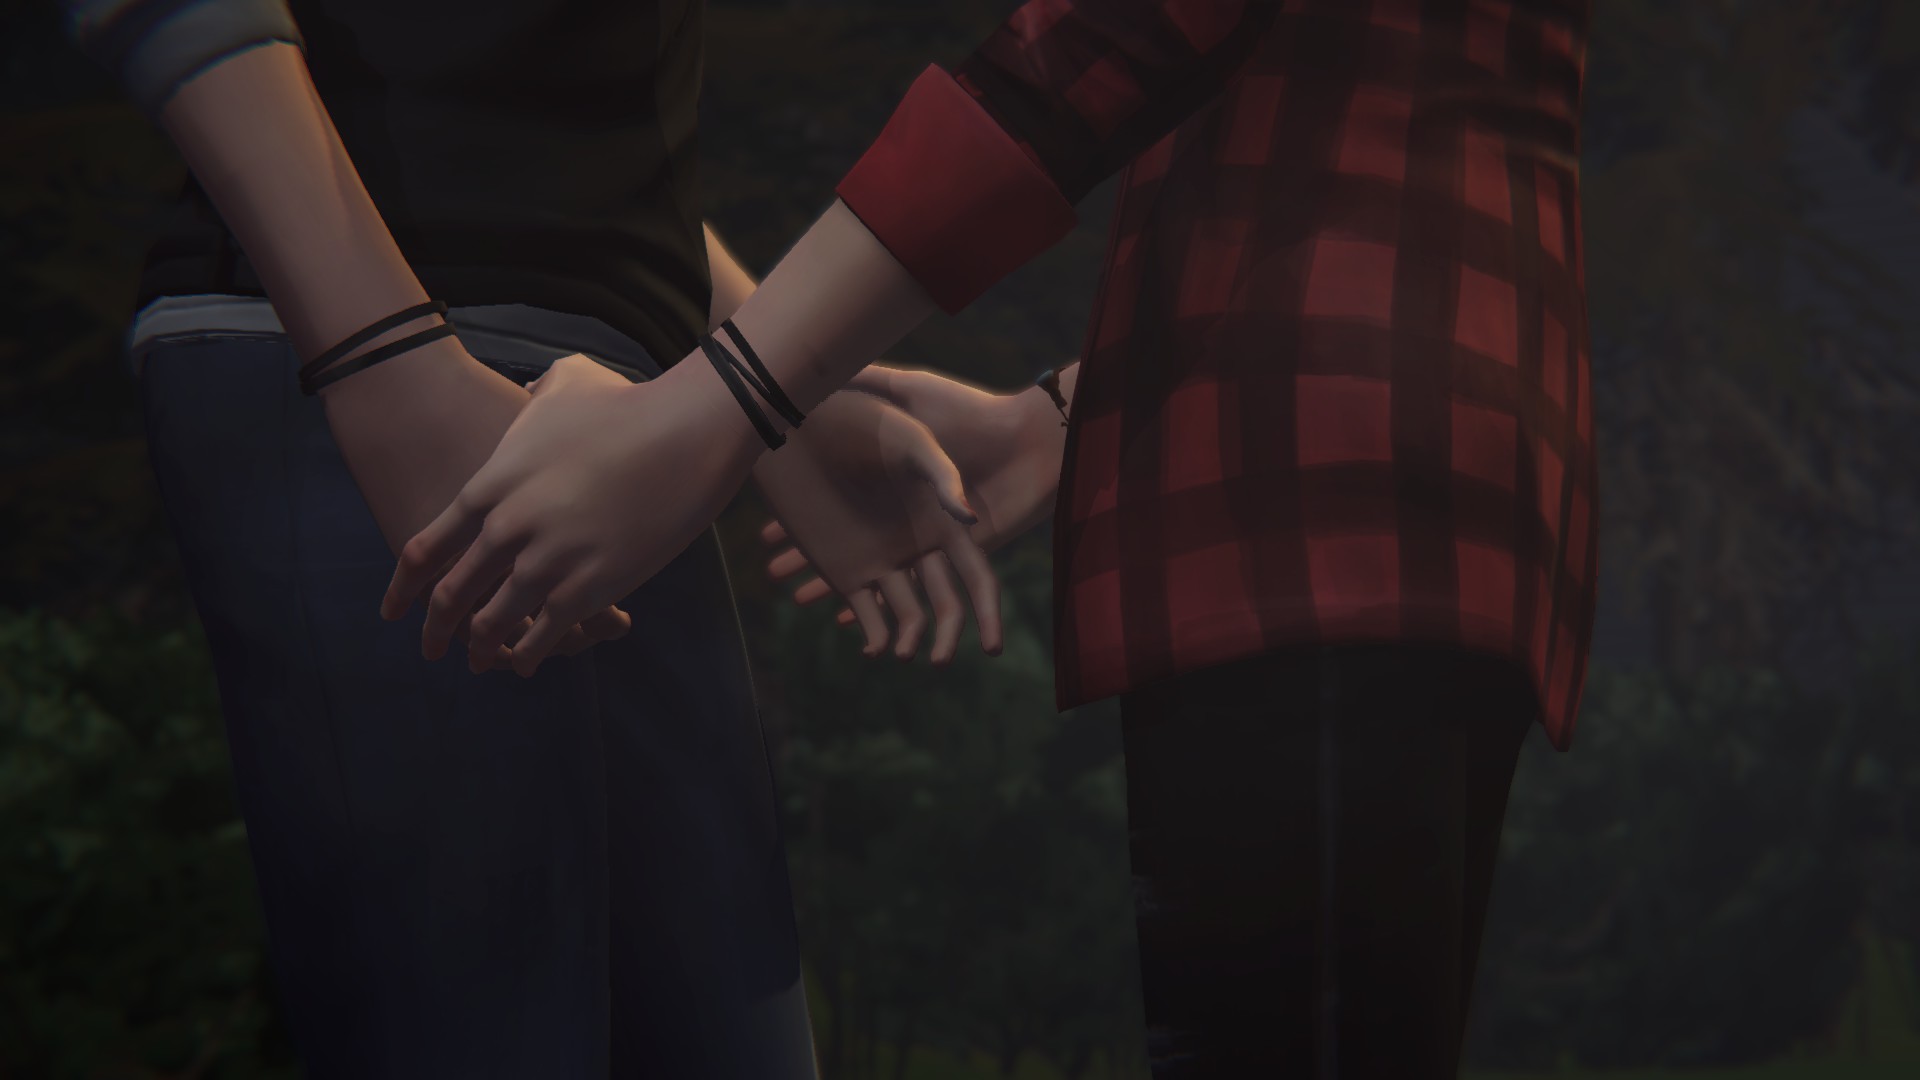 General 1920x1080 Life Is Strange Arcadia Bay Chloe Price Rachel Amber Life is Strange Before the Storm video game characters CGI holding hands bracelets video games standing video game art screen shot